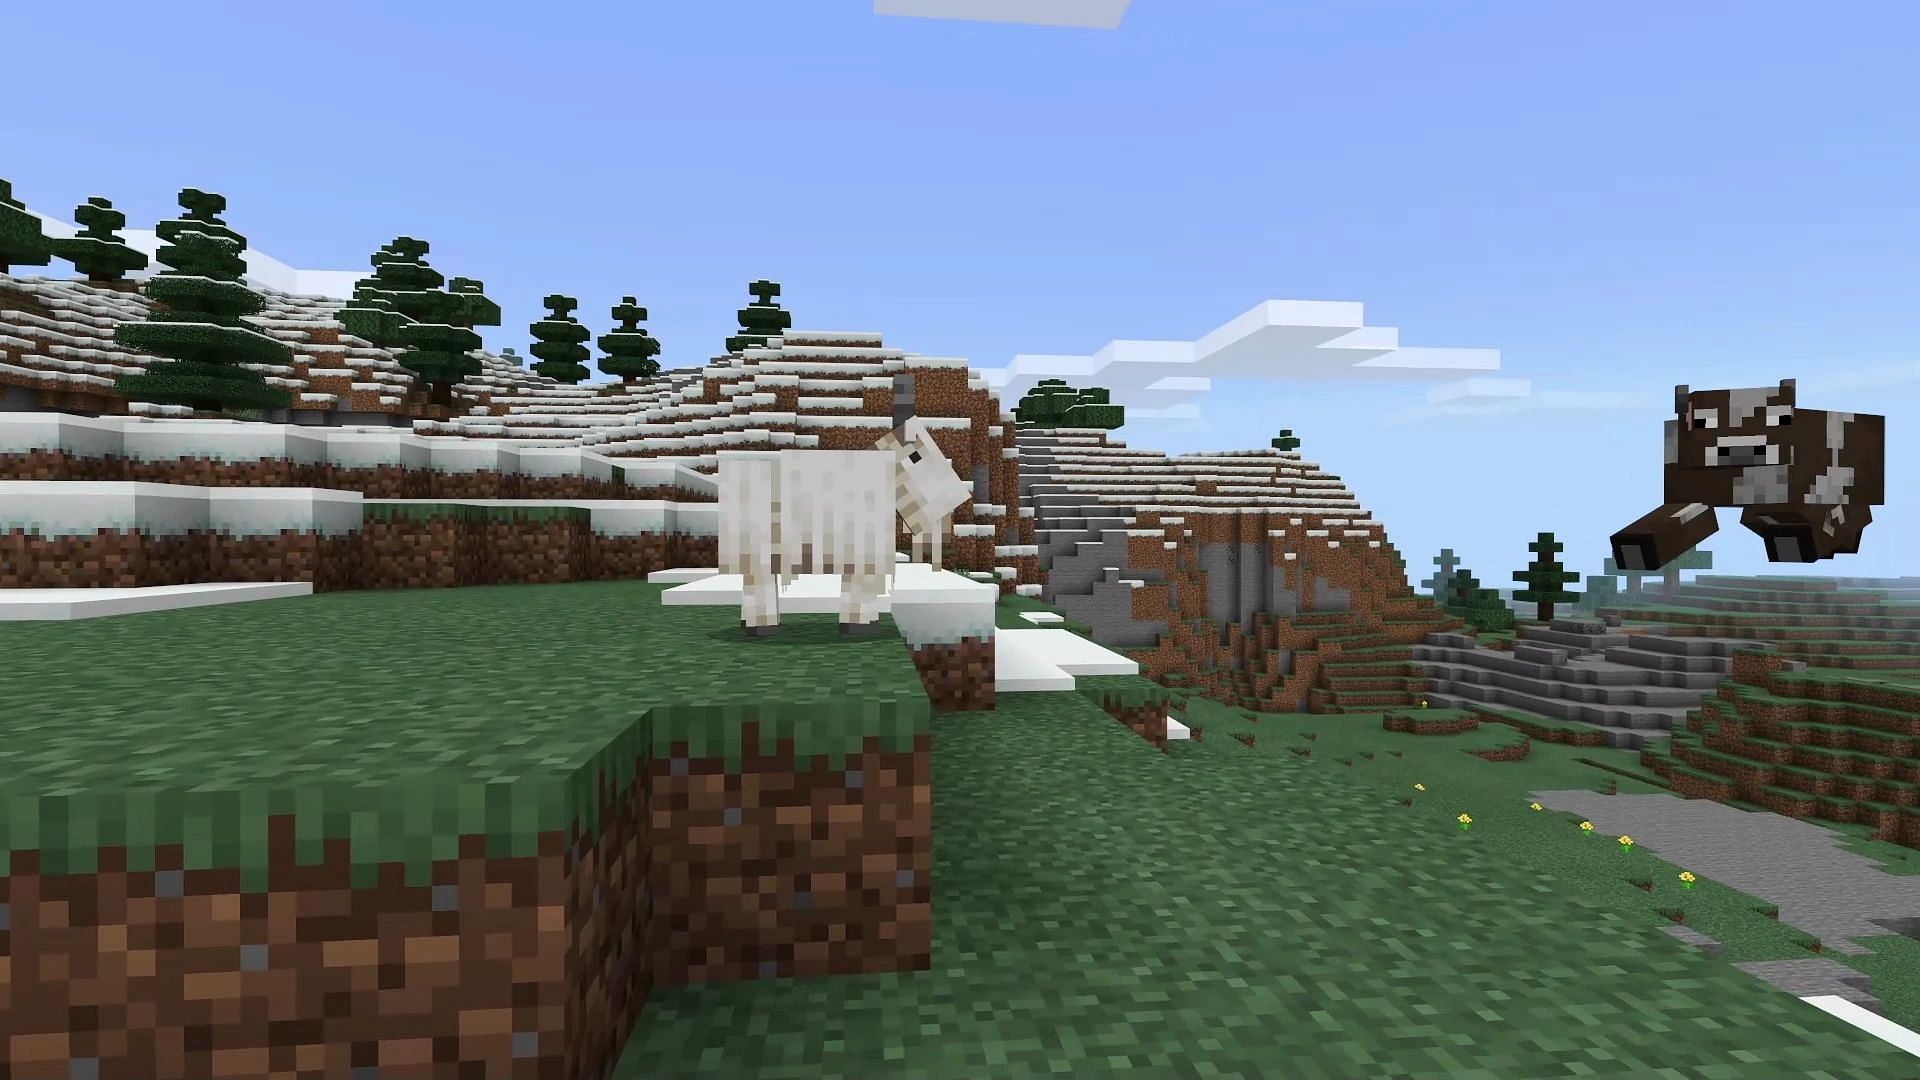 Goat ramming a cow (Image via Minecraft Wiki)